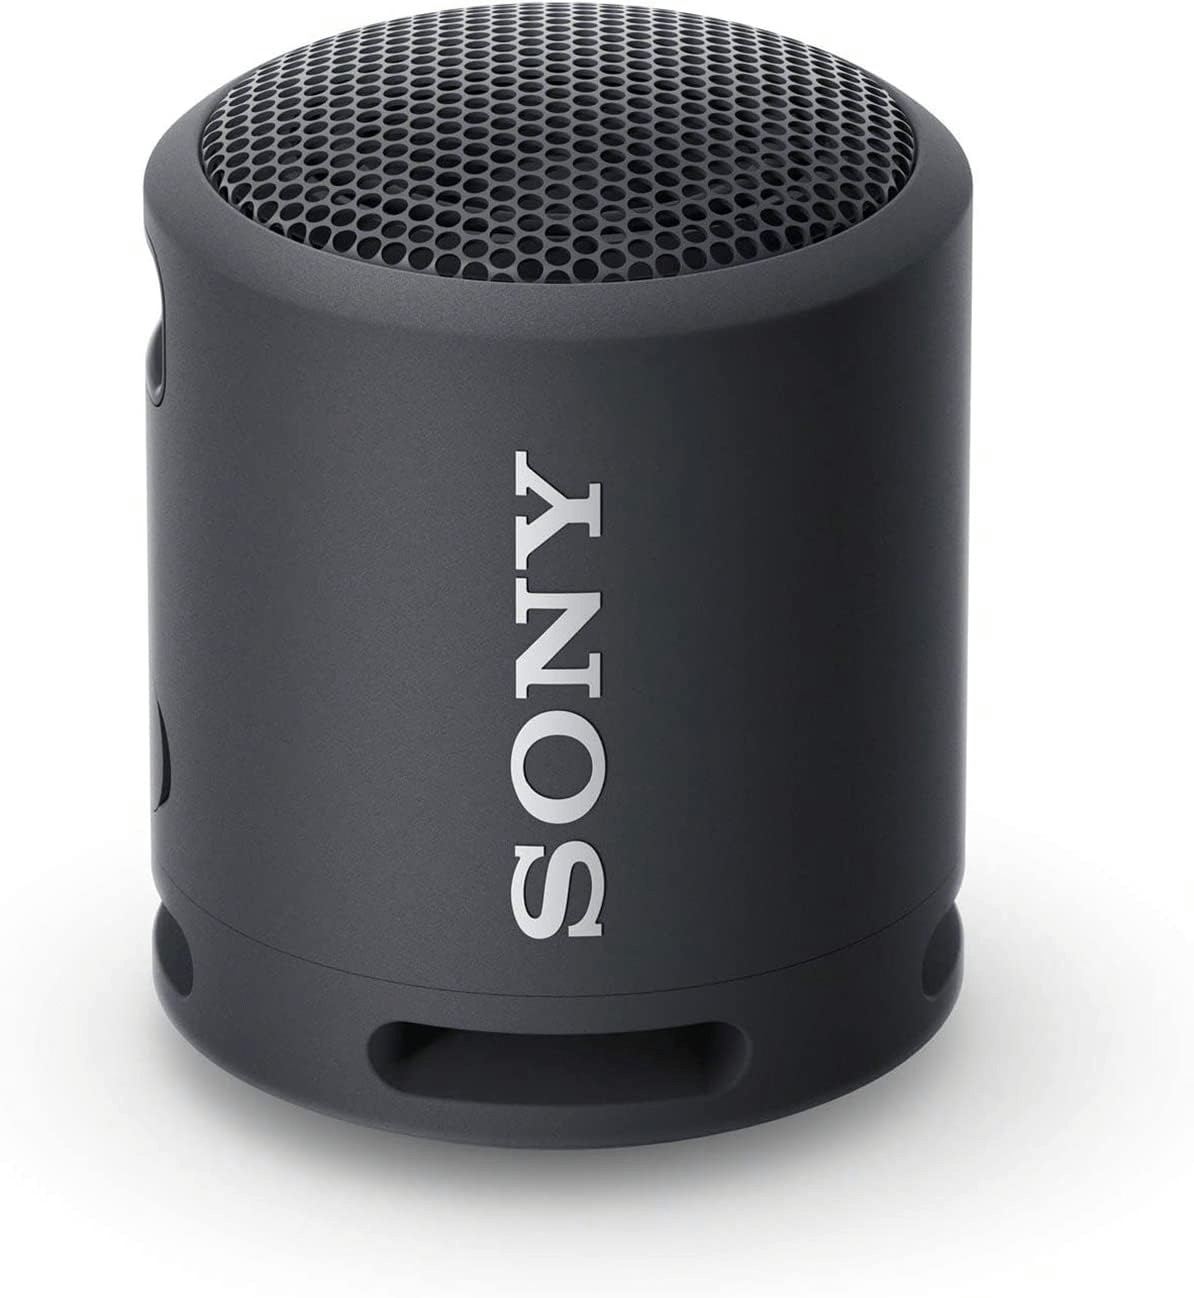 Portable Speakers on Sale - Sony SRS-XB13 EXTRA BASS Wireless Bluetooth Portable Lightweight Compact Travel Speaker